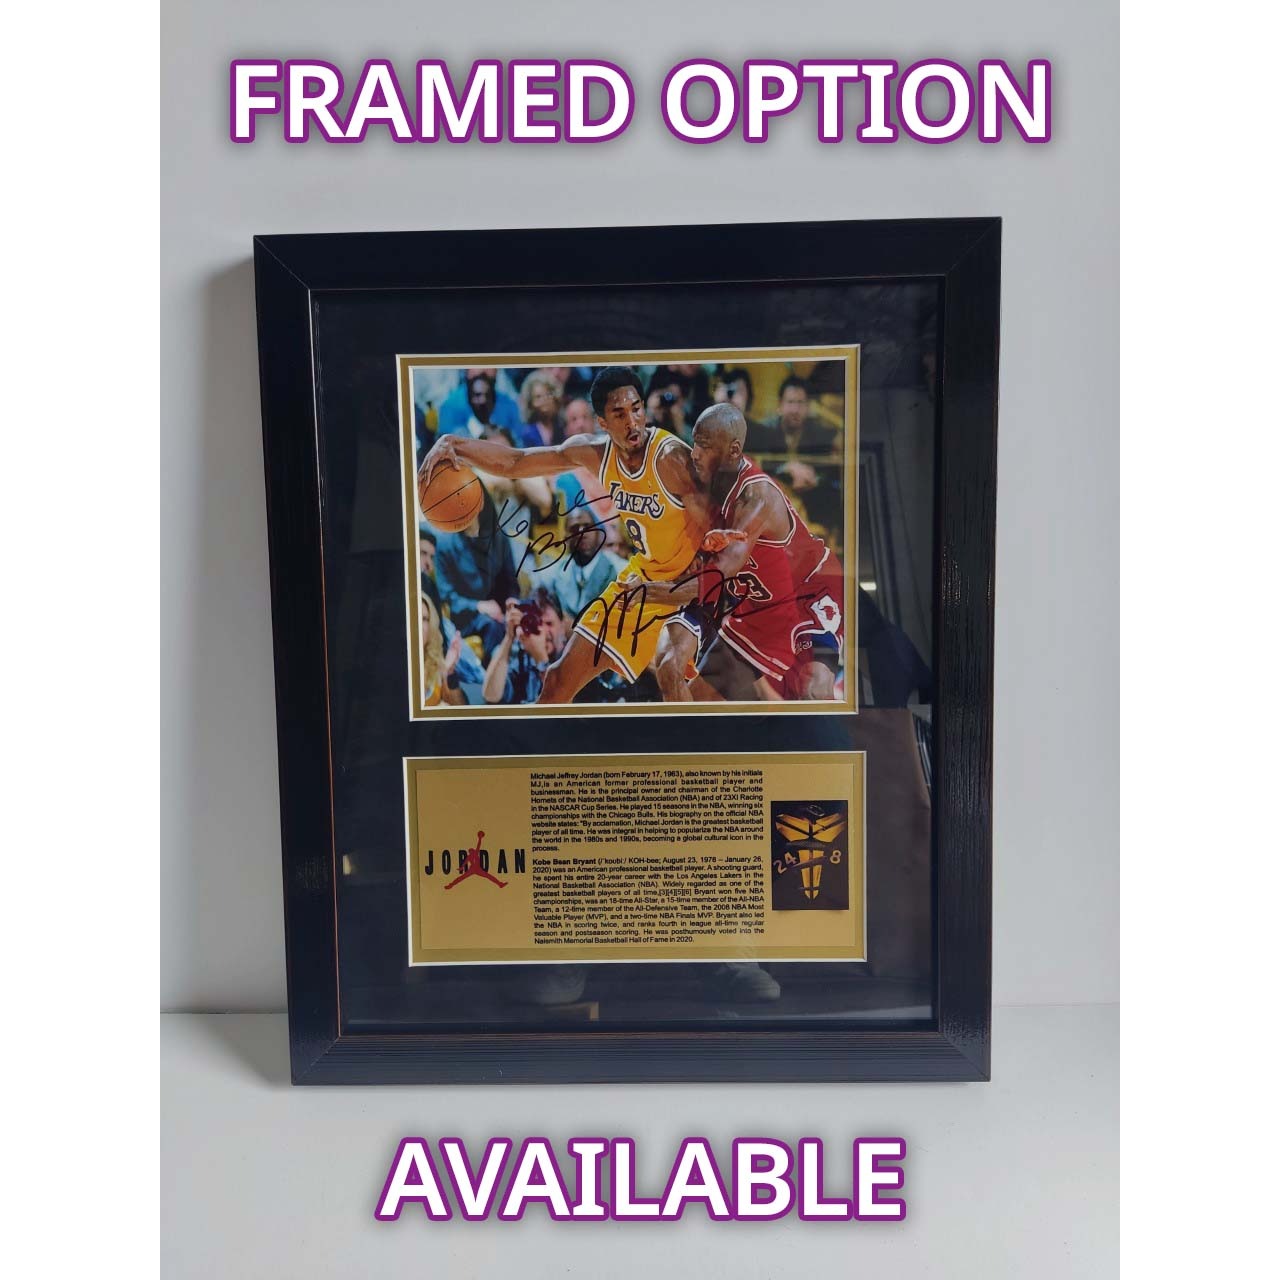 Earvin "Magic" Johnson Jerry West Chick Hearn Jerry Buss James Worthy the showtime Lakers 16x20 photo signed with proof